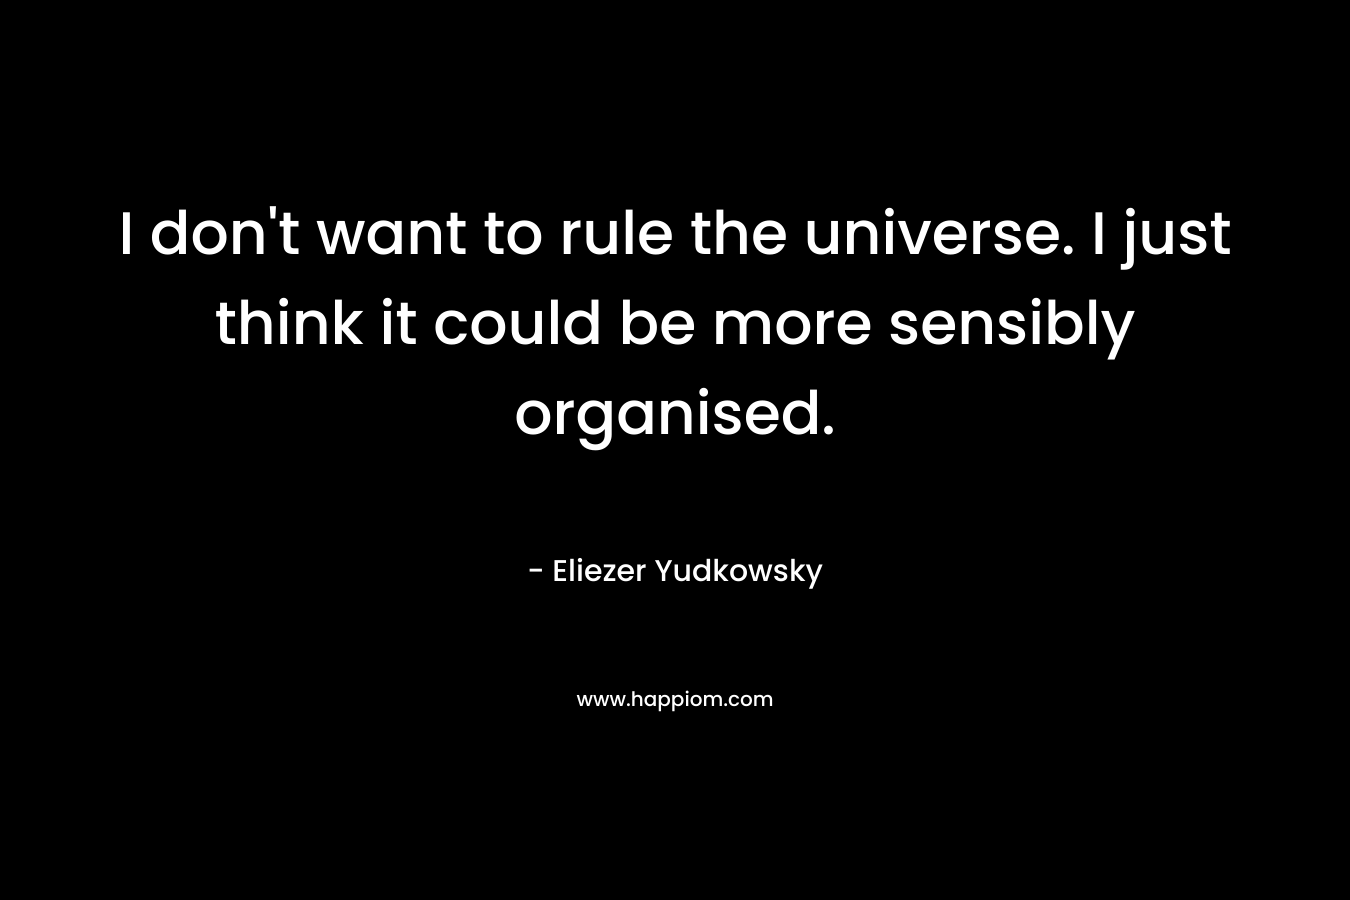 I don’t want to rule the universe. I just think it could be more sensibly organised. – Eliezer Yudkowsky